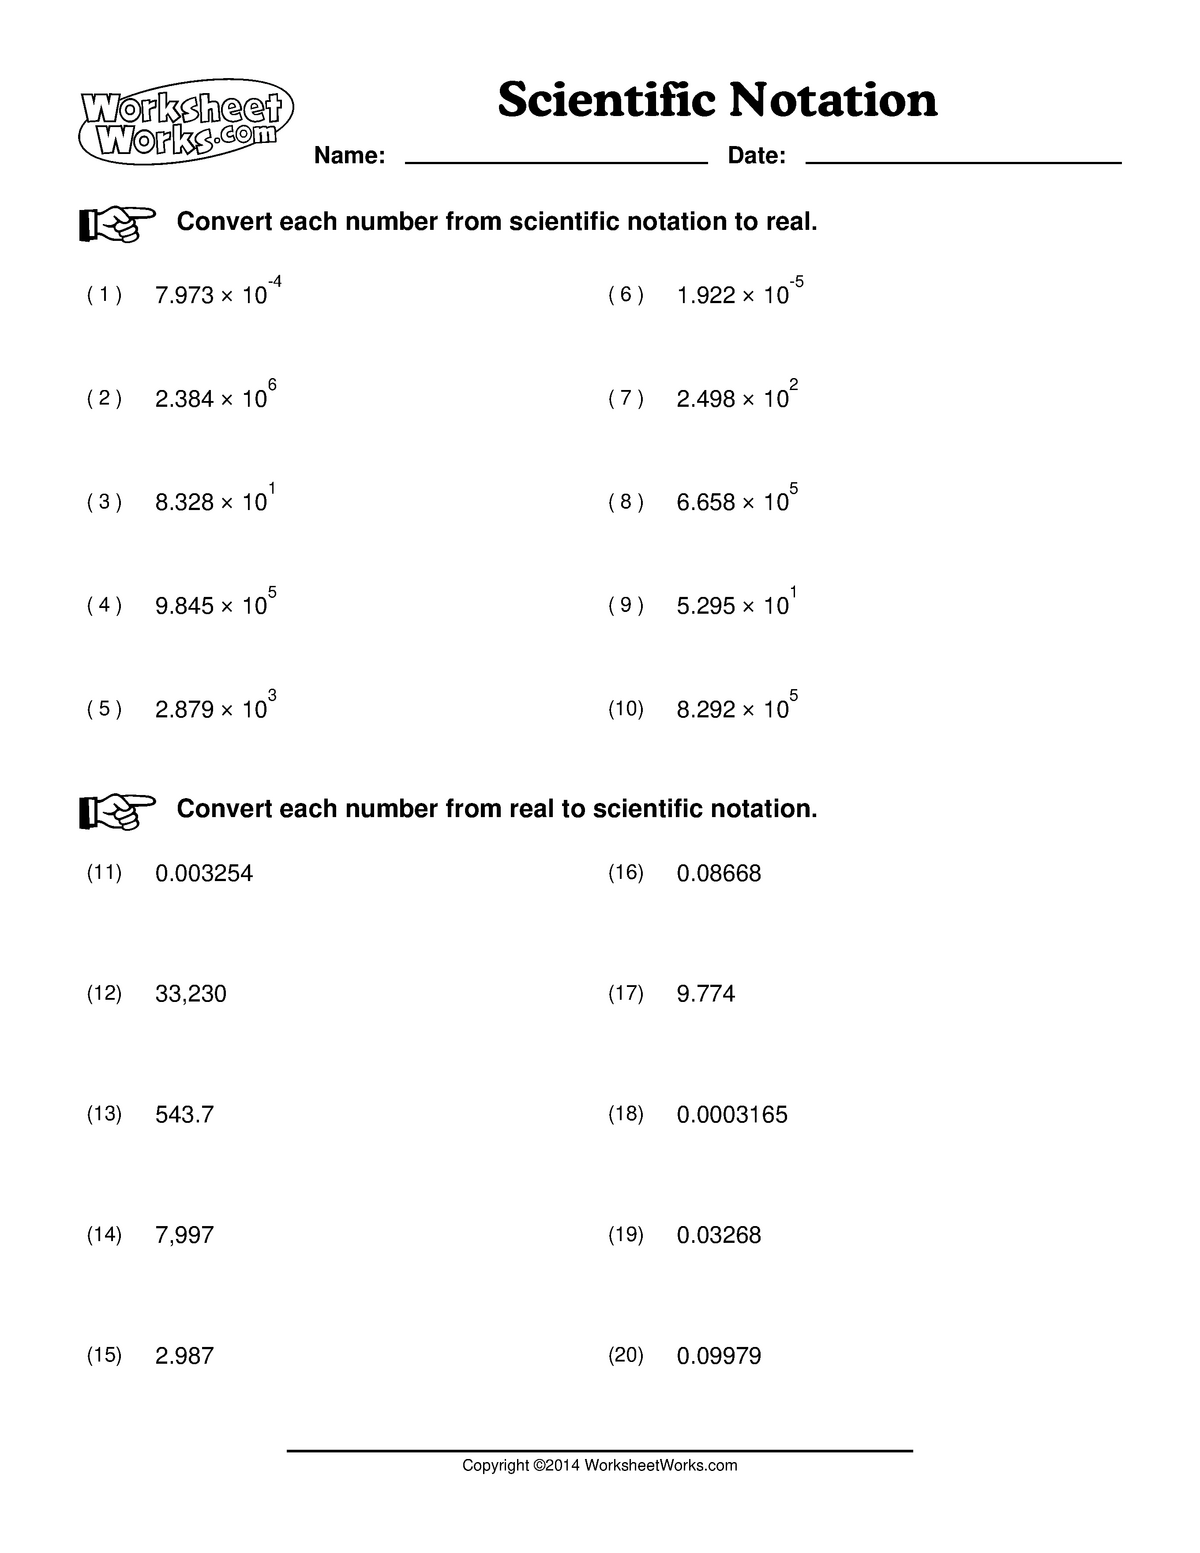 Scientific Notation Practice Problems - CHEM-CH20 - Chemistry Throughout Scientific Notation Worksheet Answers